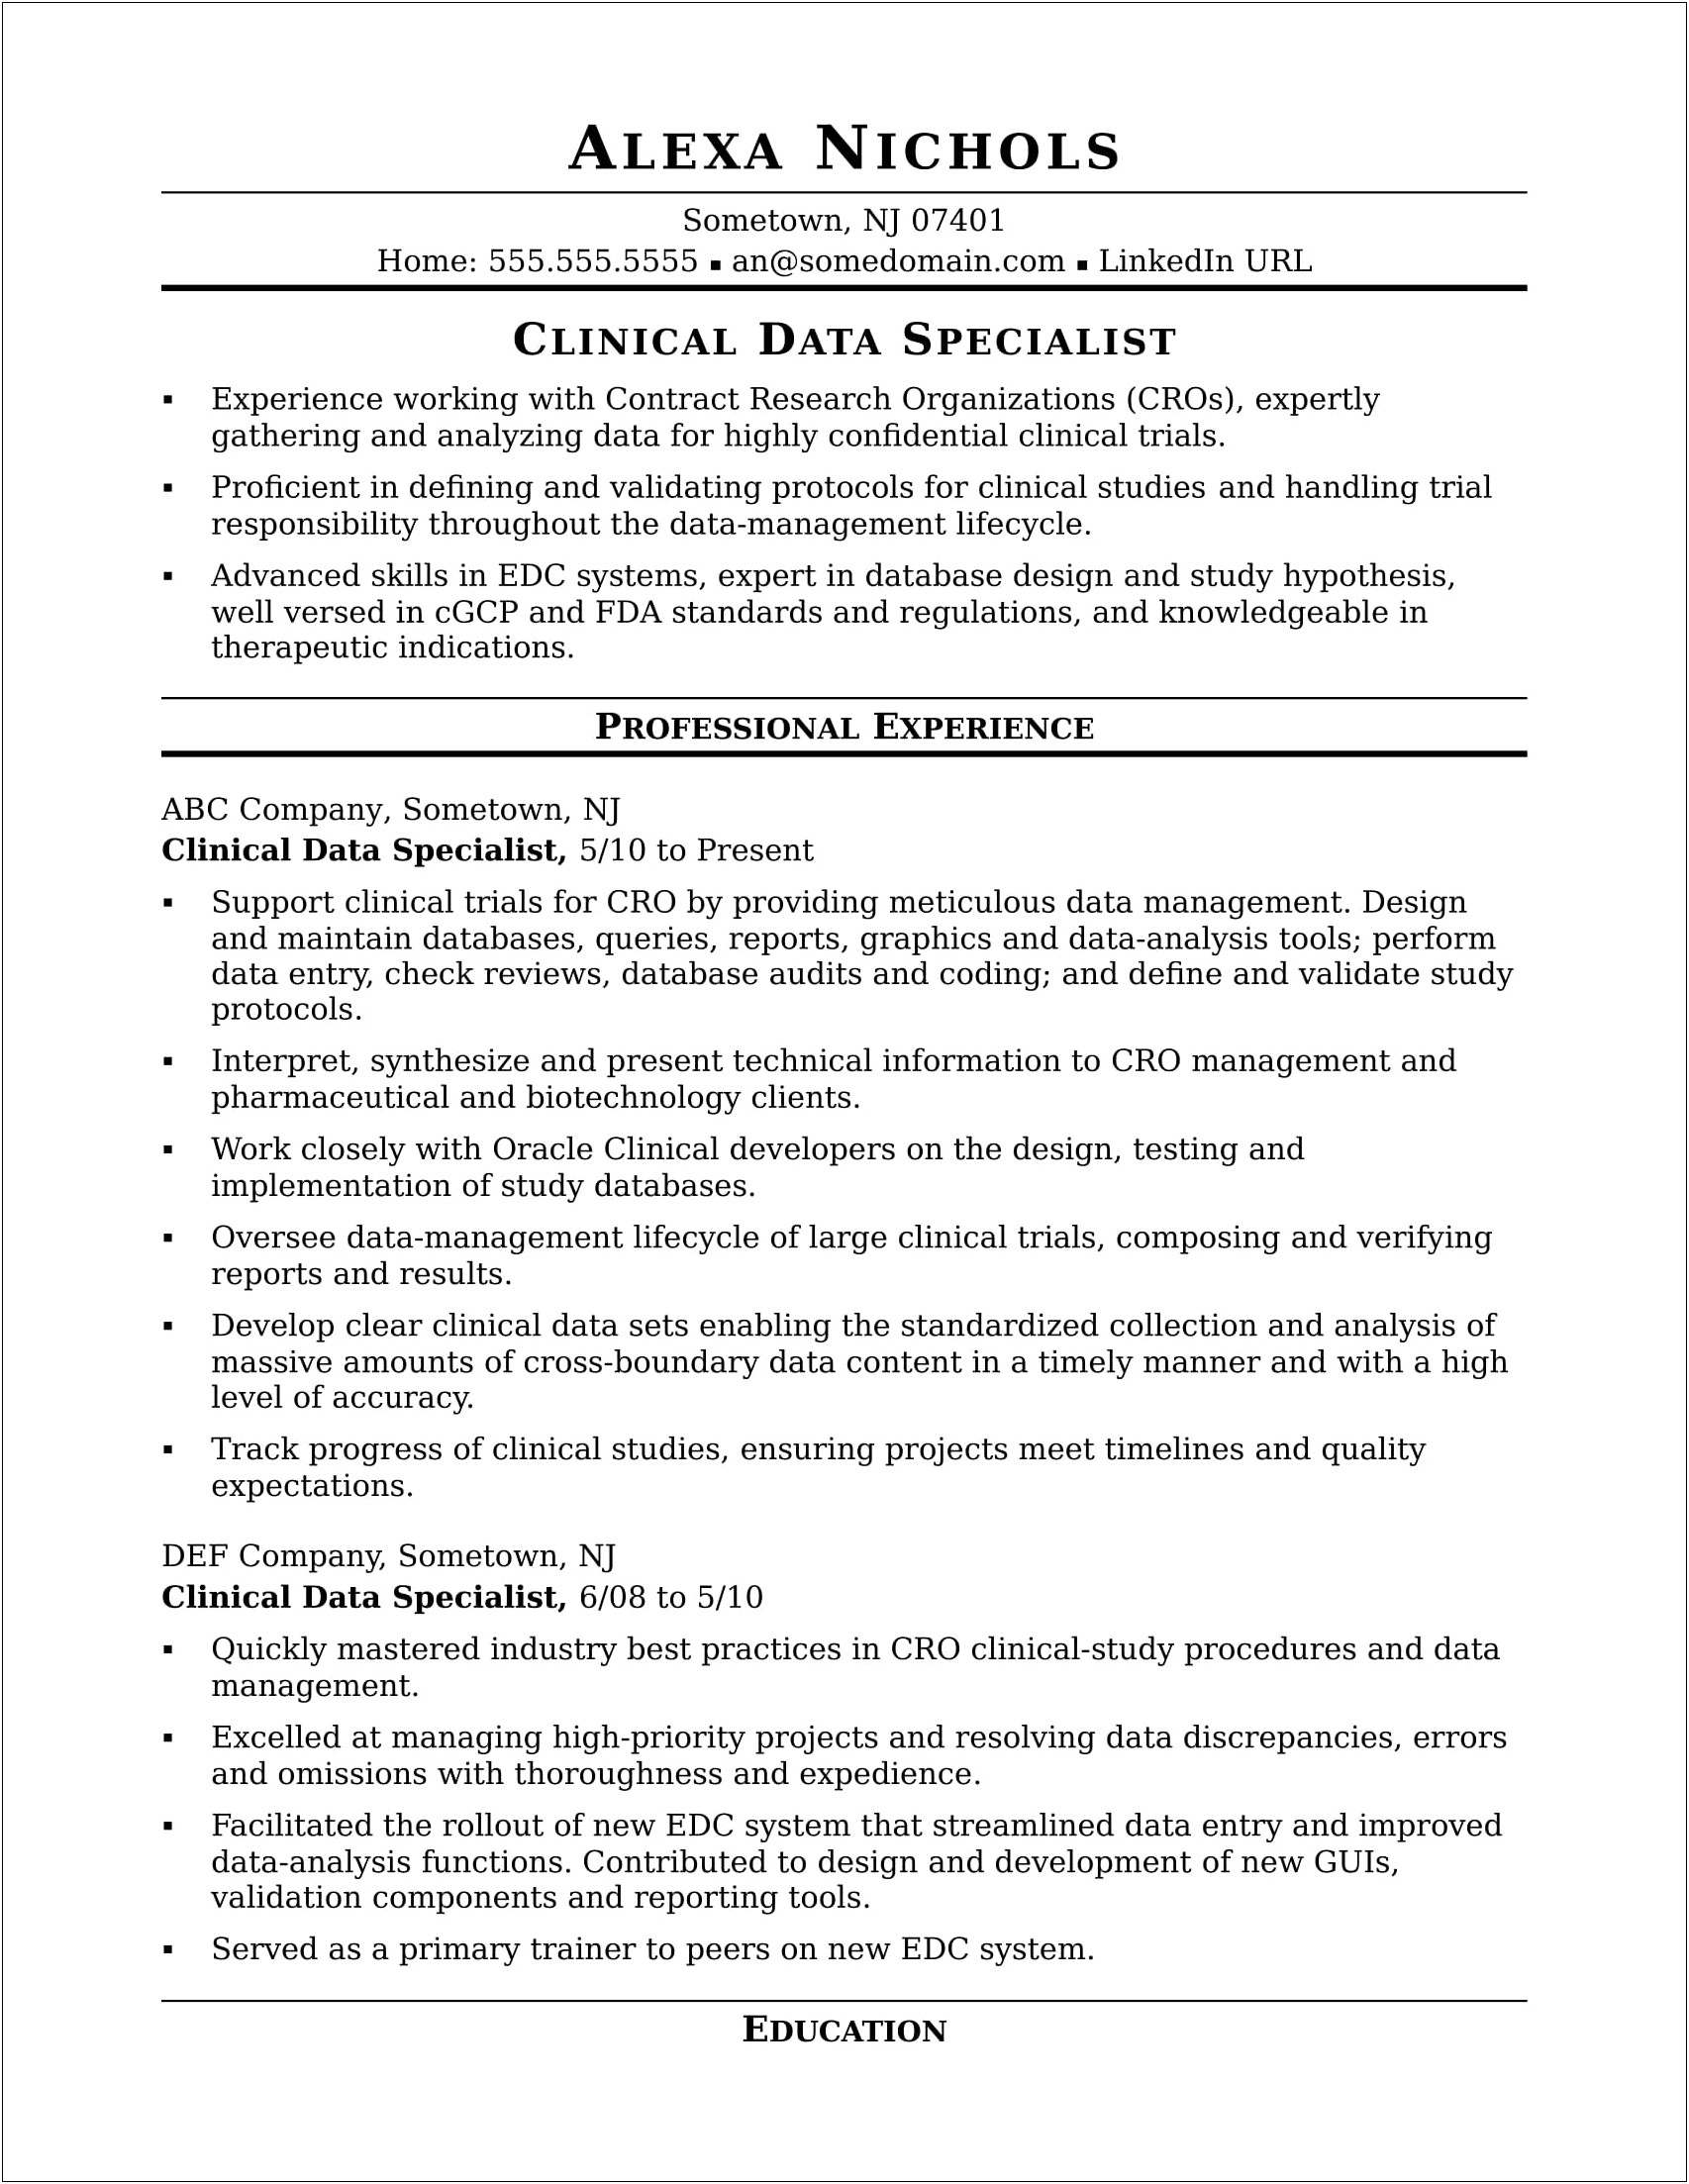 Resume Objective For Data Entry Specialist